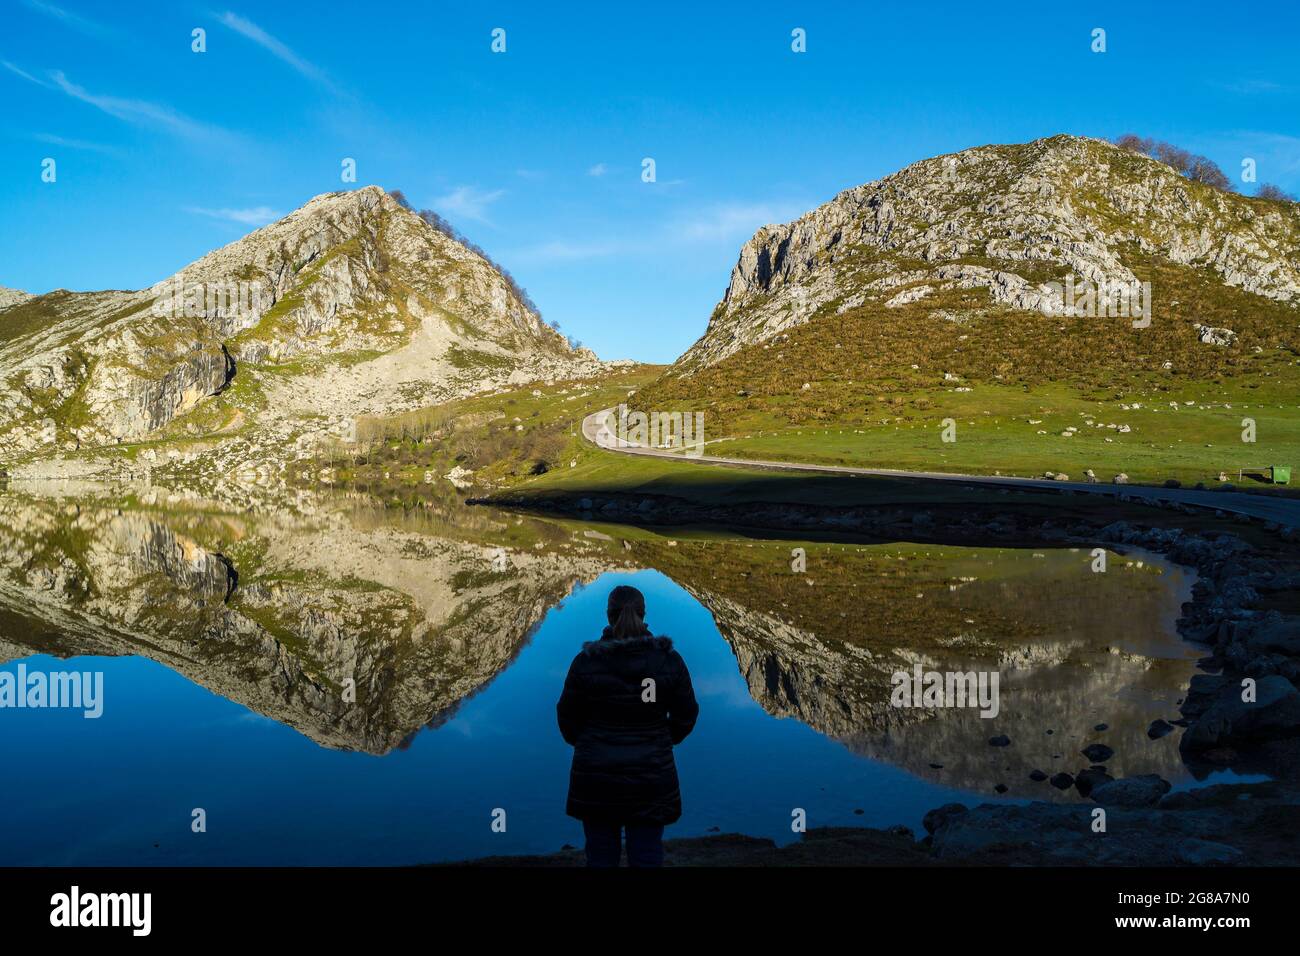 Silhouette of a woman observing the reflection of the mountains in Lake Enol.The photograph is taken at sunrise in the Lakes of Covadonga, Asturias, S Stock Photo